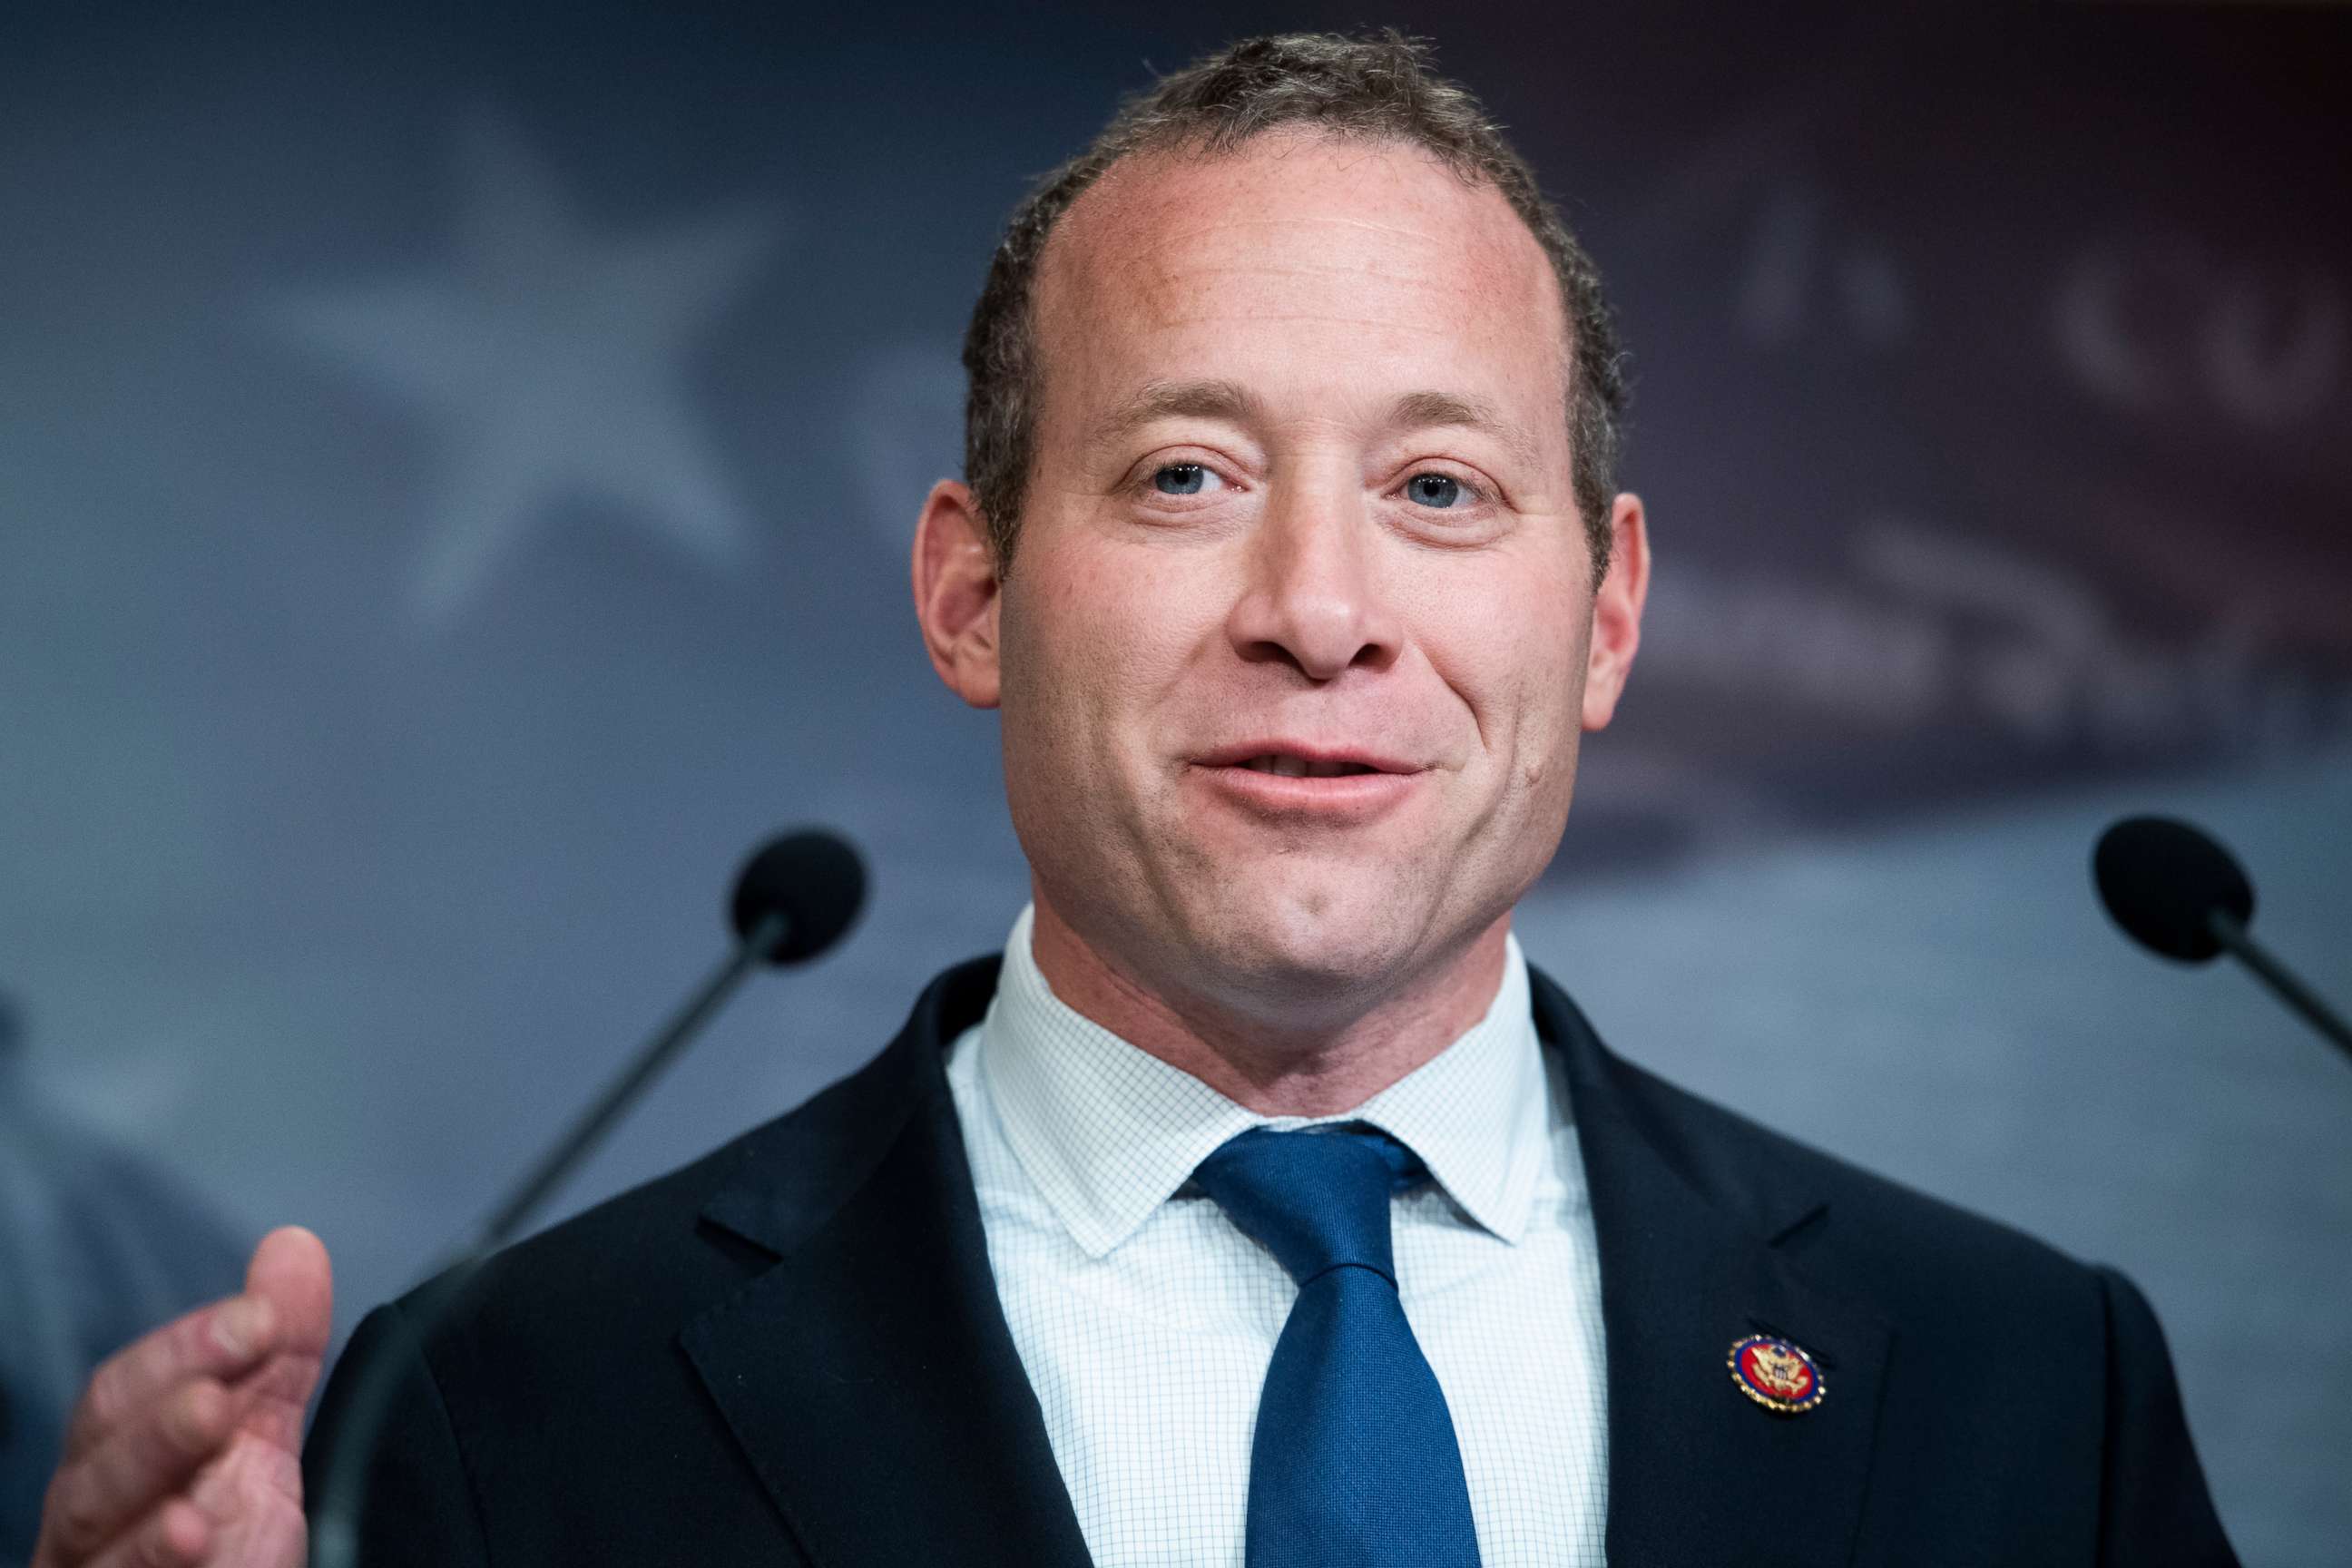 PHOTO: Rep. Josh Gottheimer conducts a news conference introducing legislation that would help offset expenses incurred by new parents in the Capitol on Wednesday, Dec. 4, 2019.